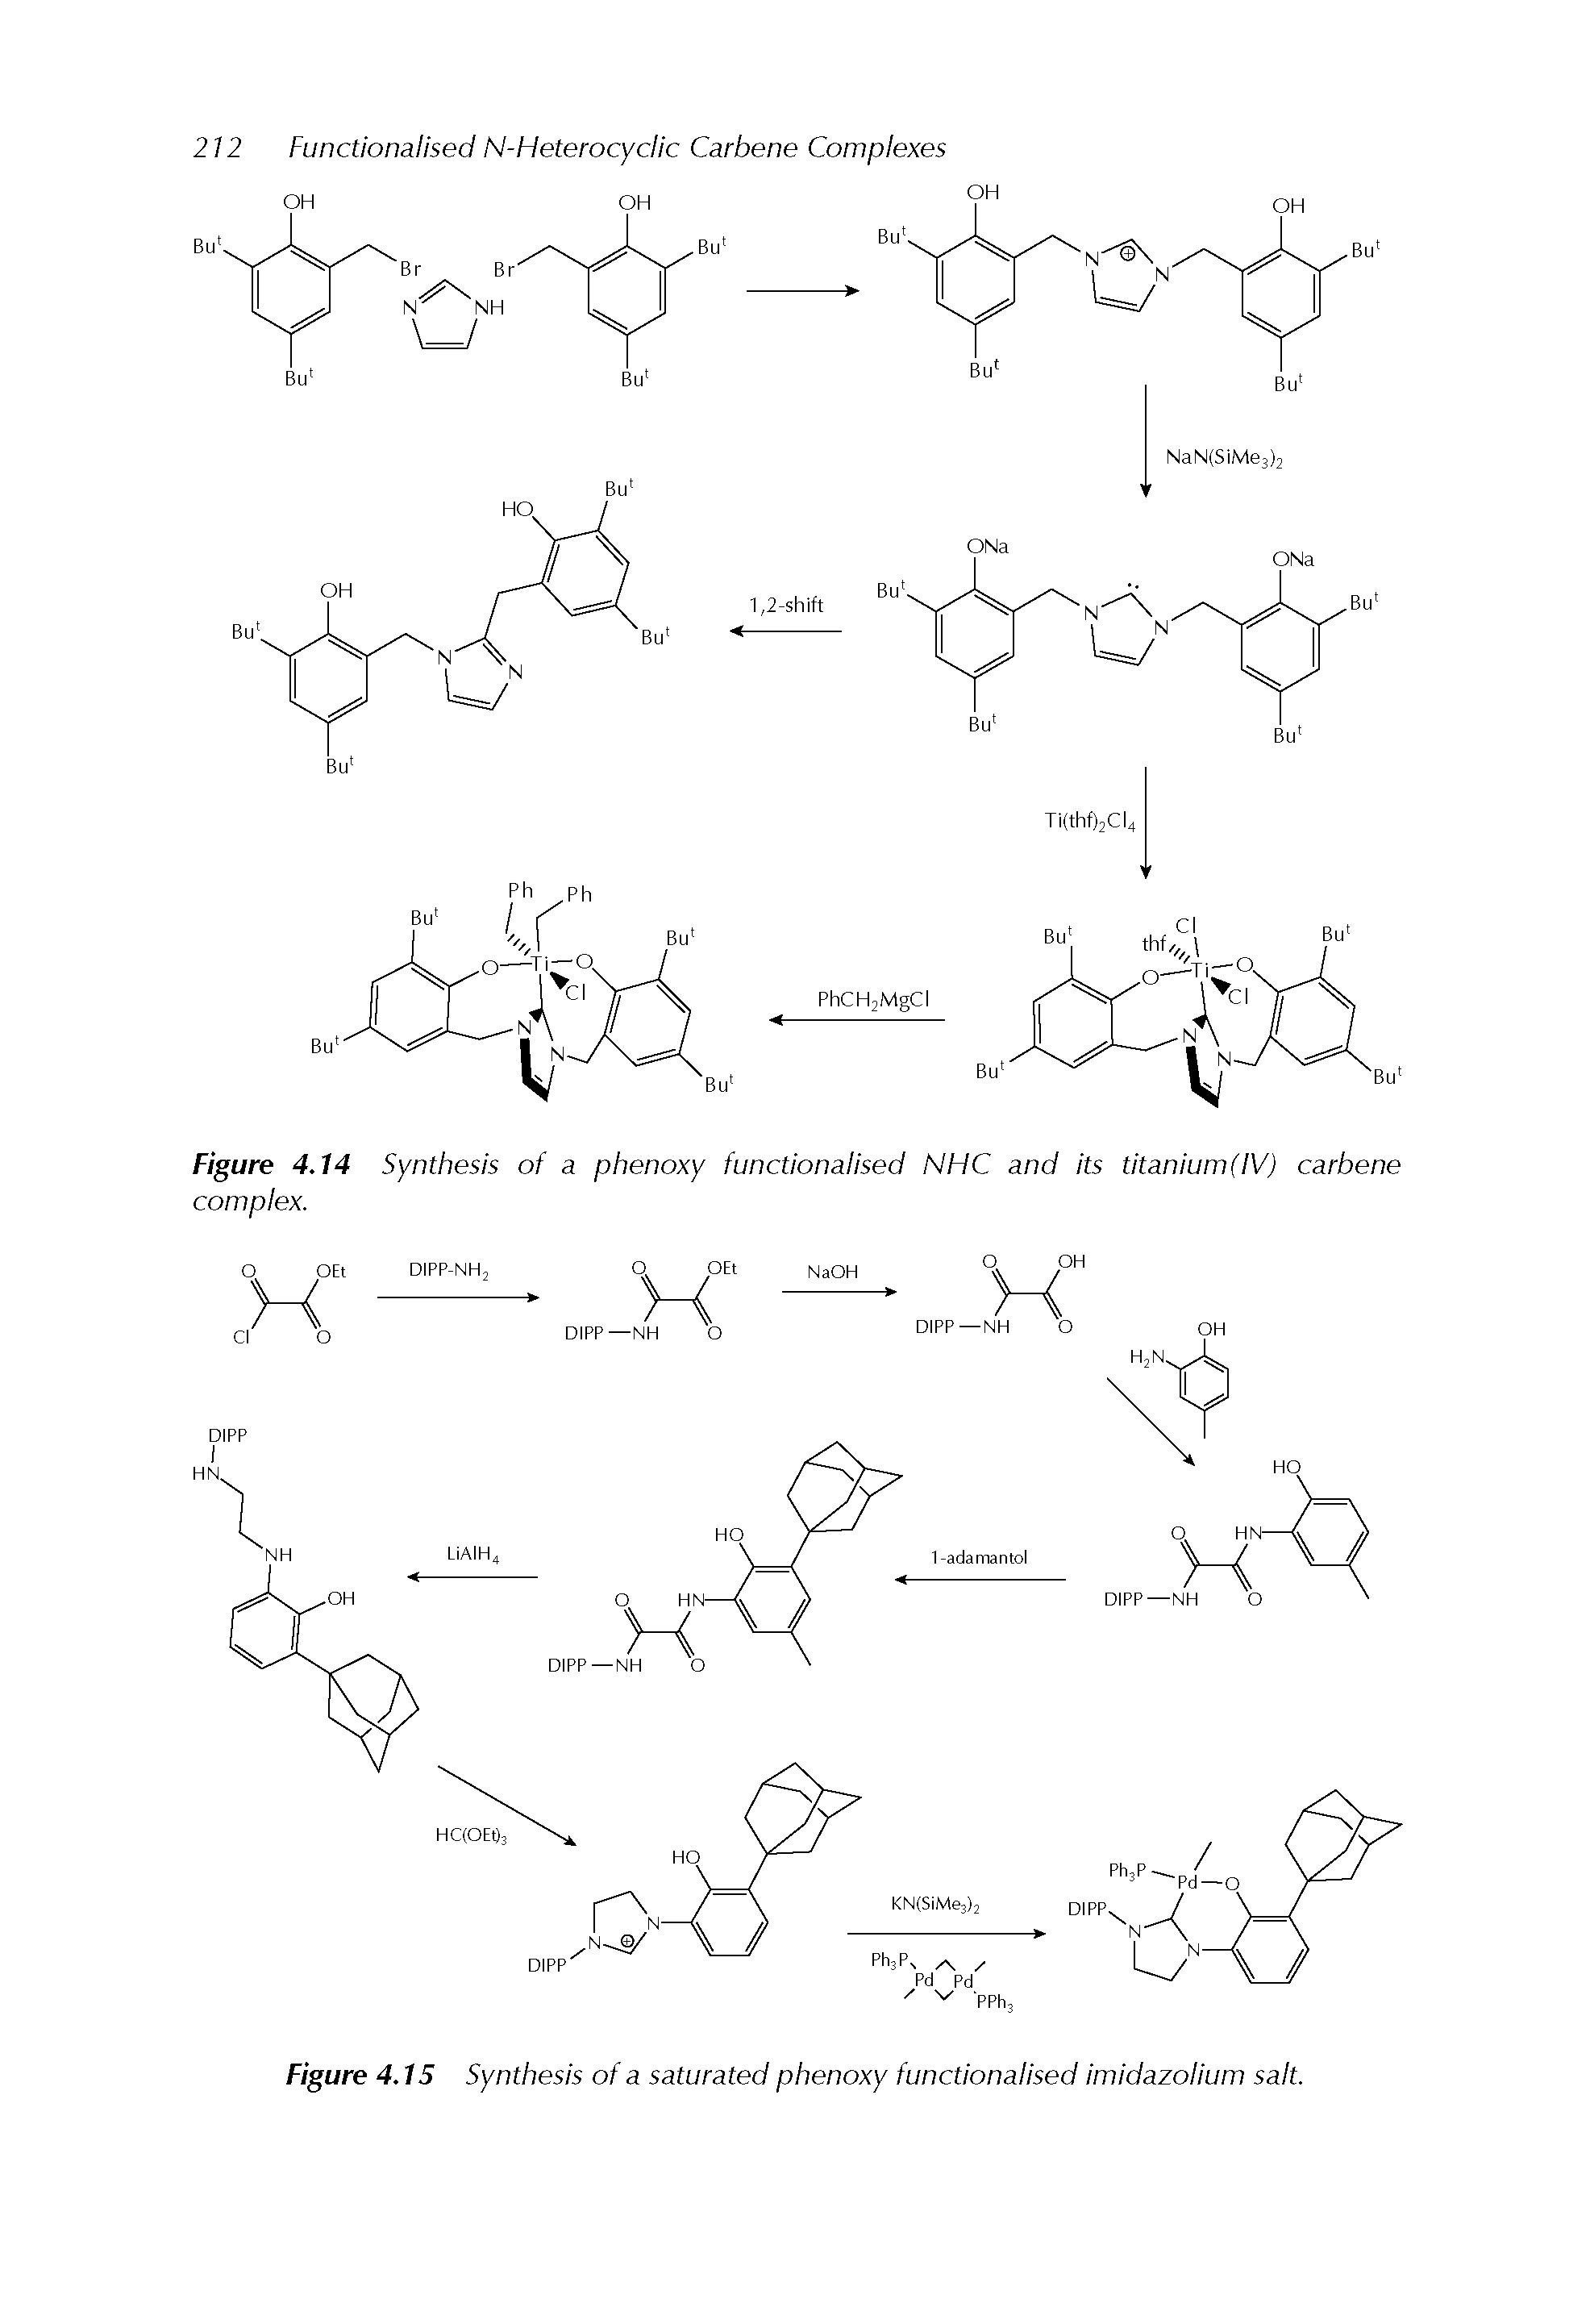 Figure 4.15 Synthesis of a saturated phenoxy functionalised imidazolium salt.